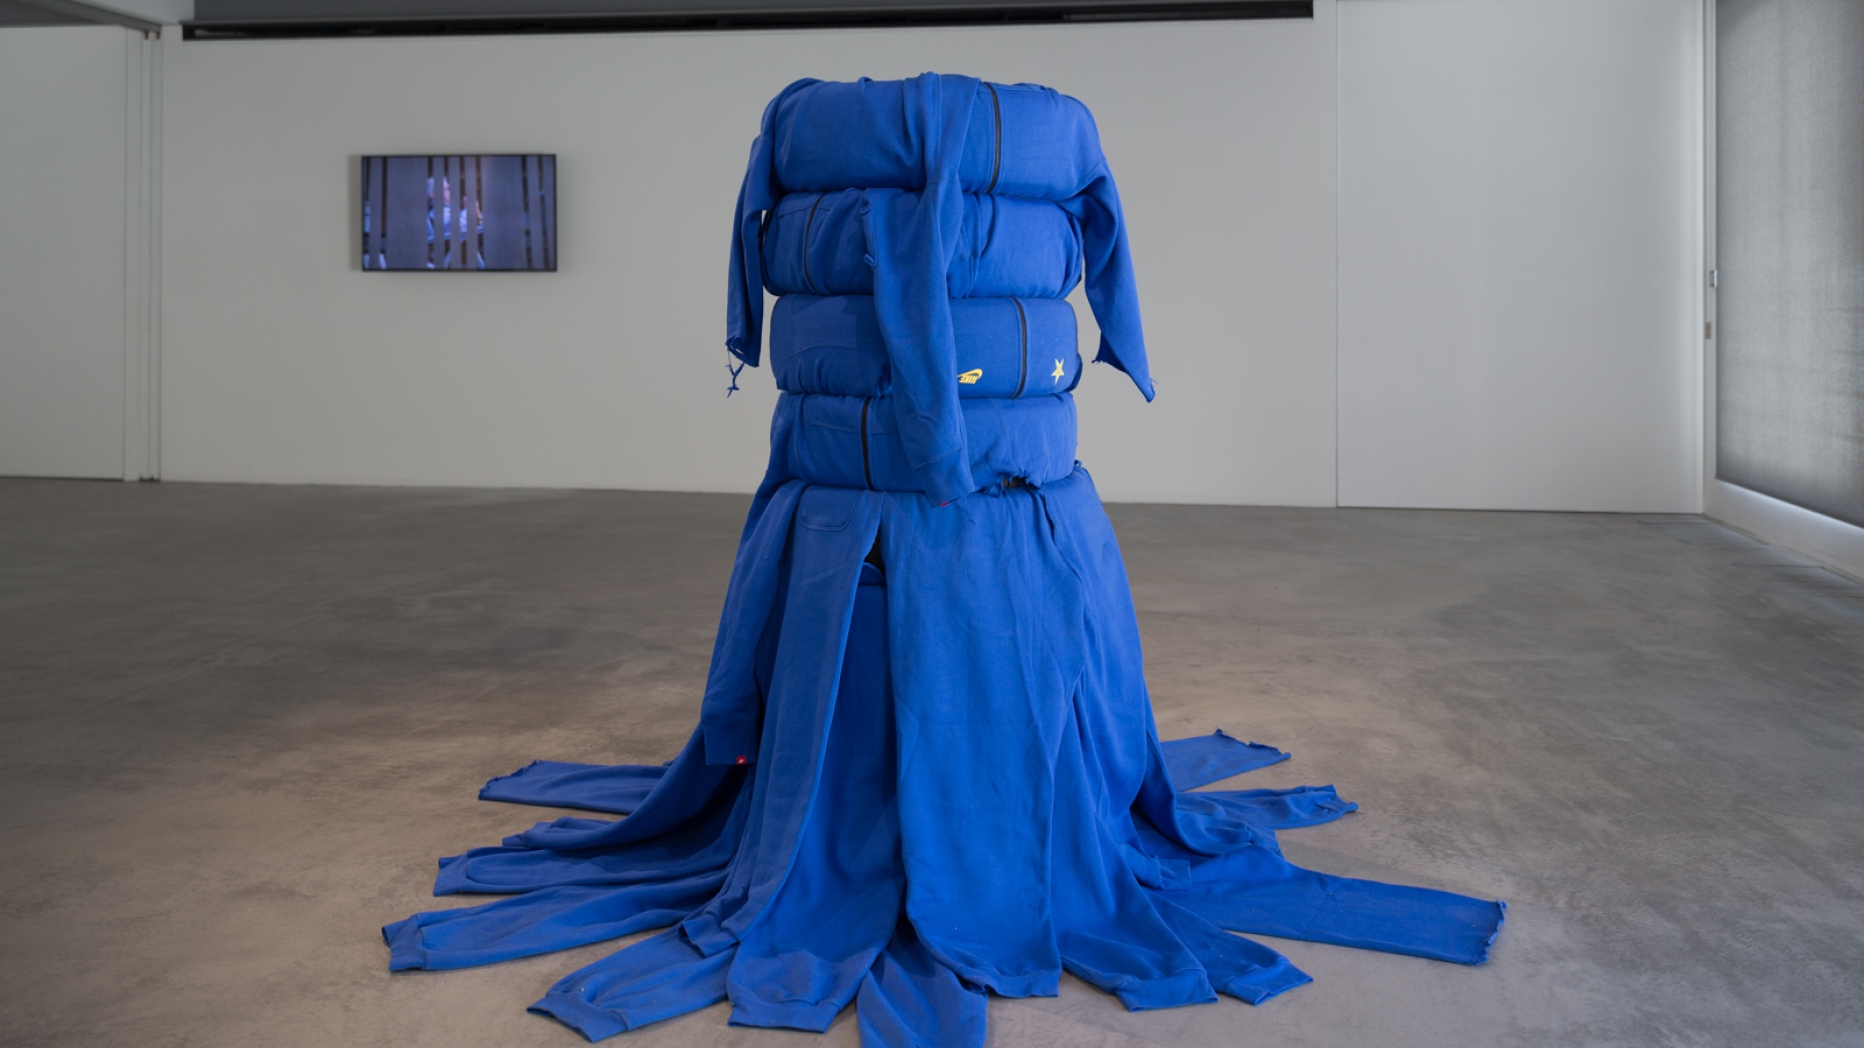 Sculpture featuring blue track suits wrapped around a stack of car tires.